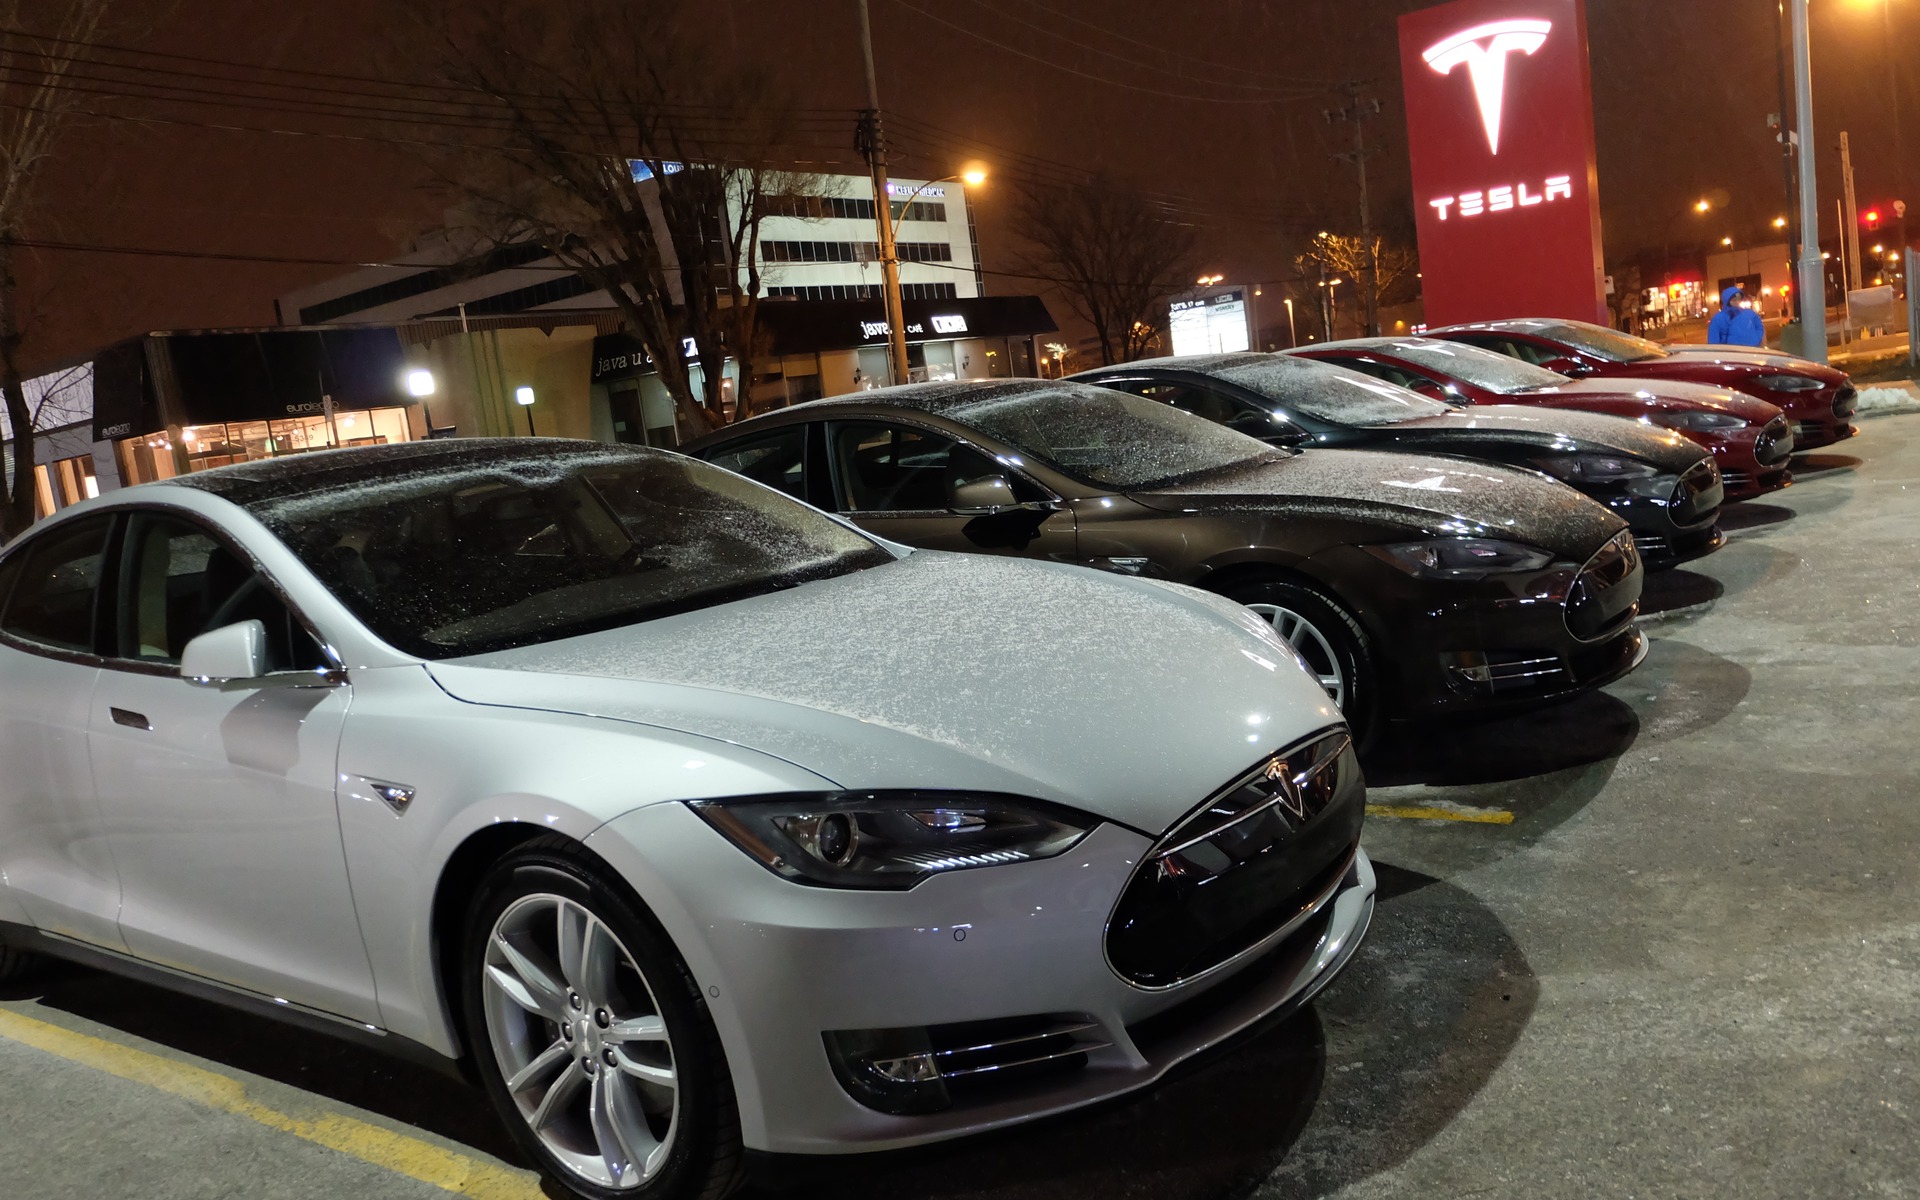 Shiny new Model S, looking for a new owner.